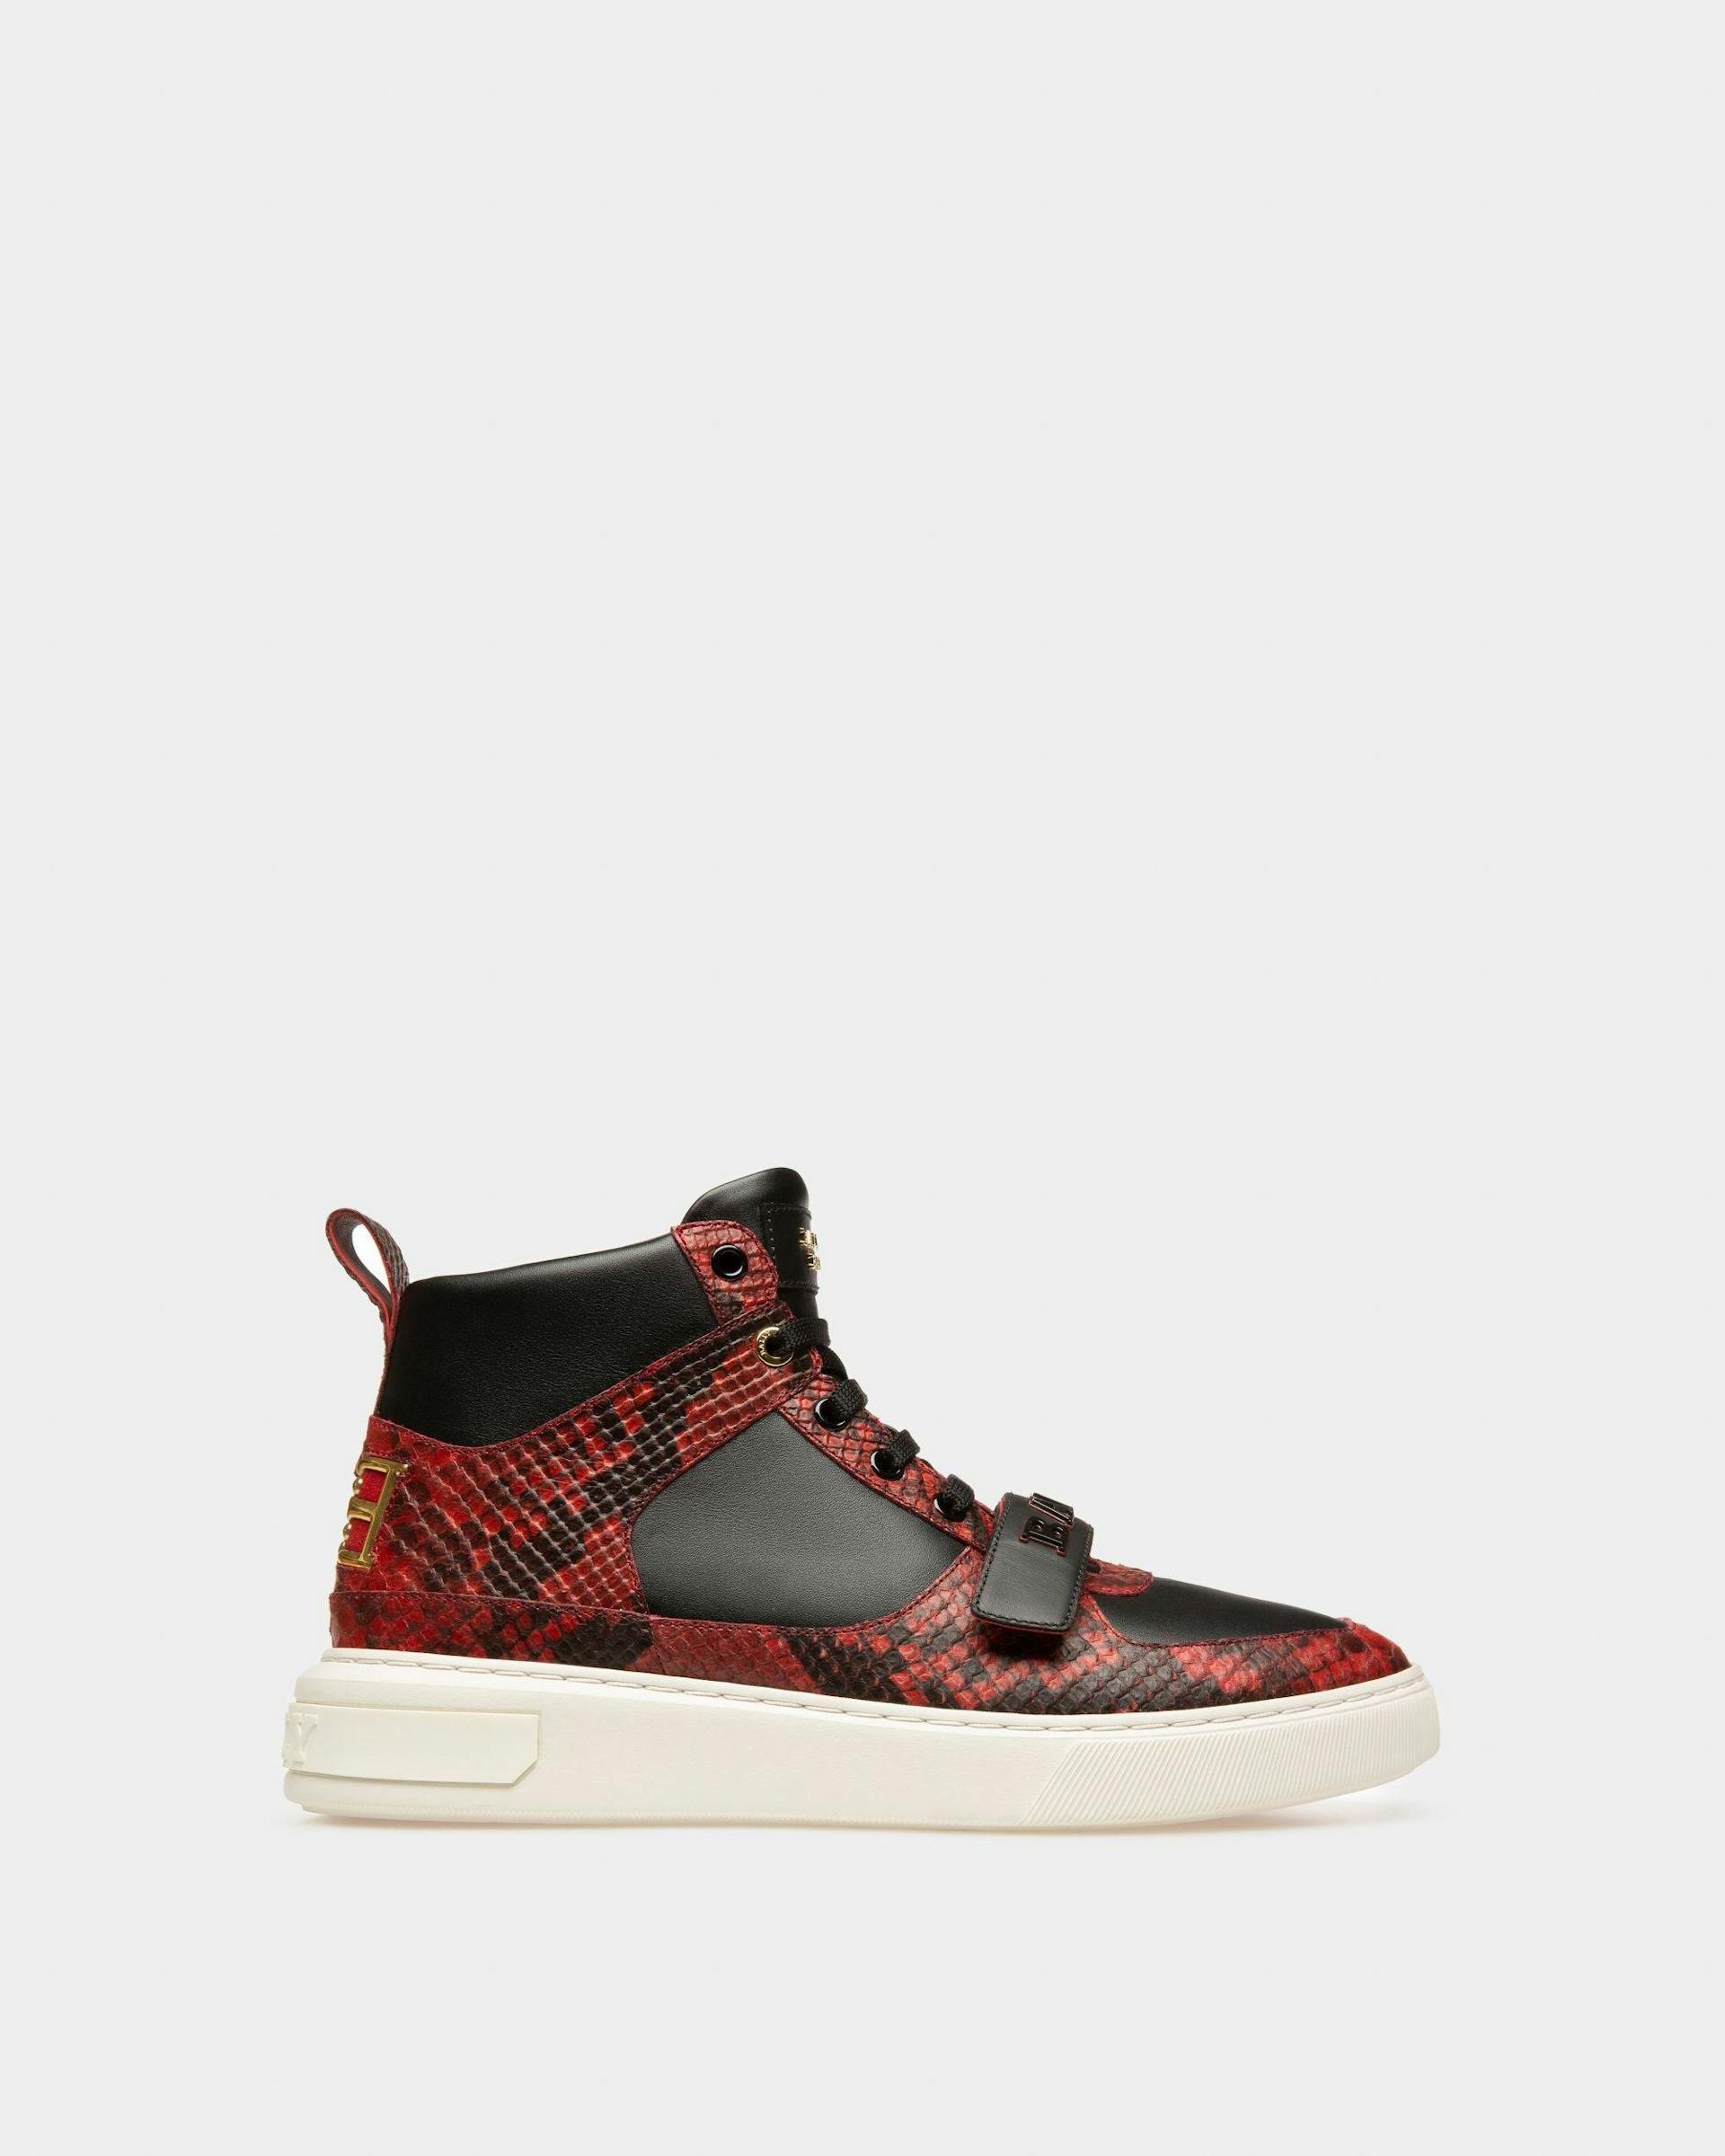 Merryk Leather Sneakers In Bally Red & Black - Men's - Bally - 01